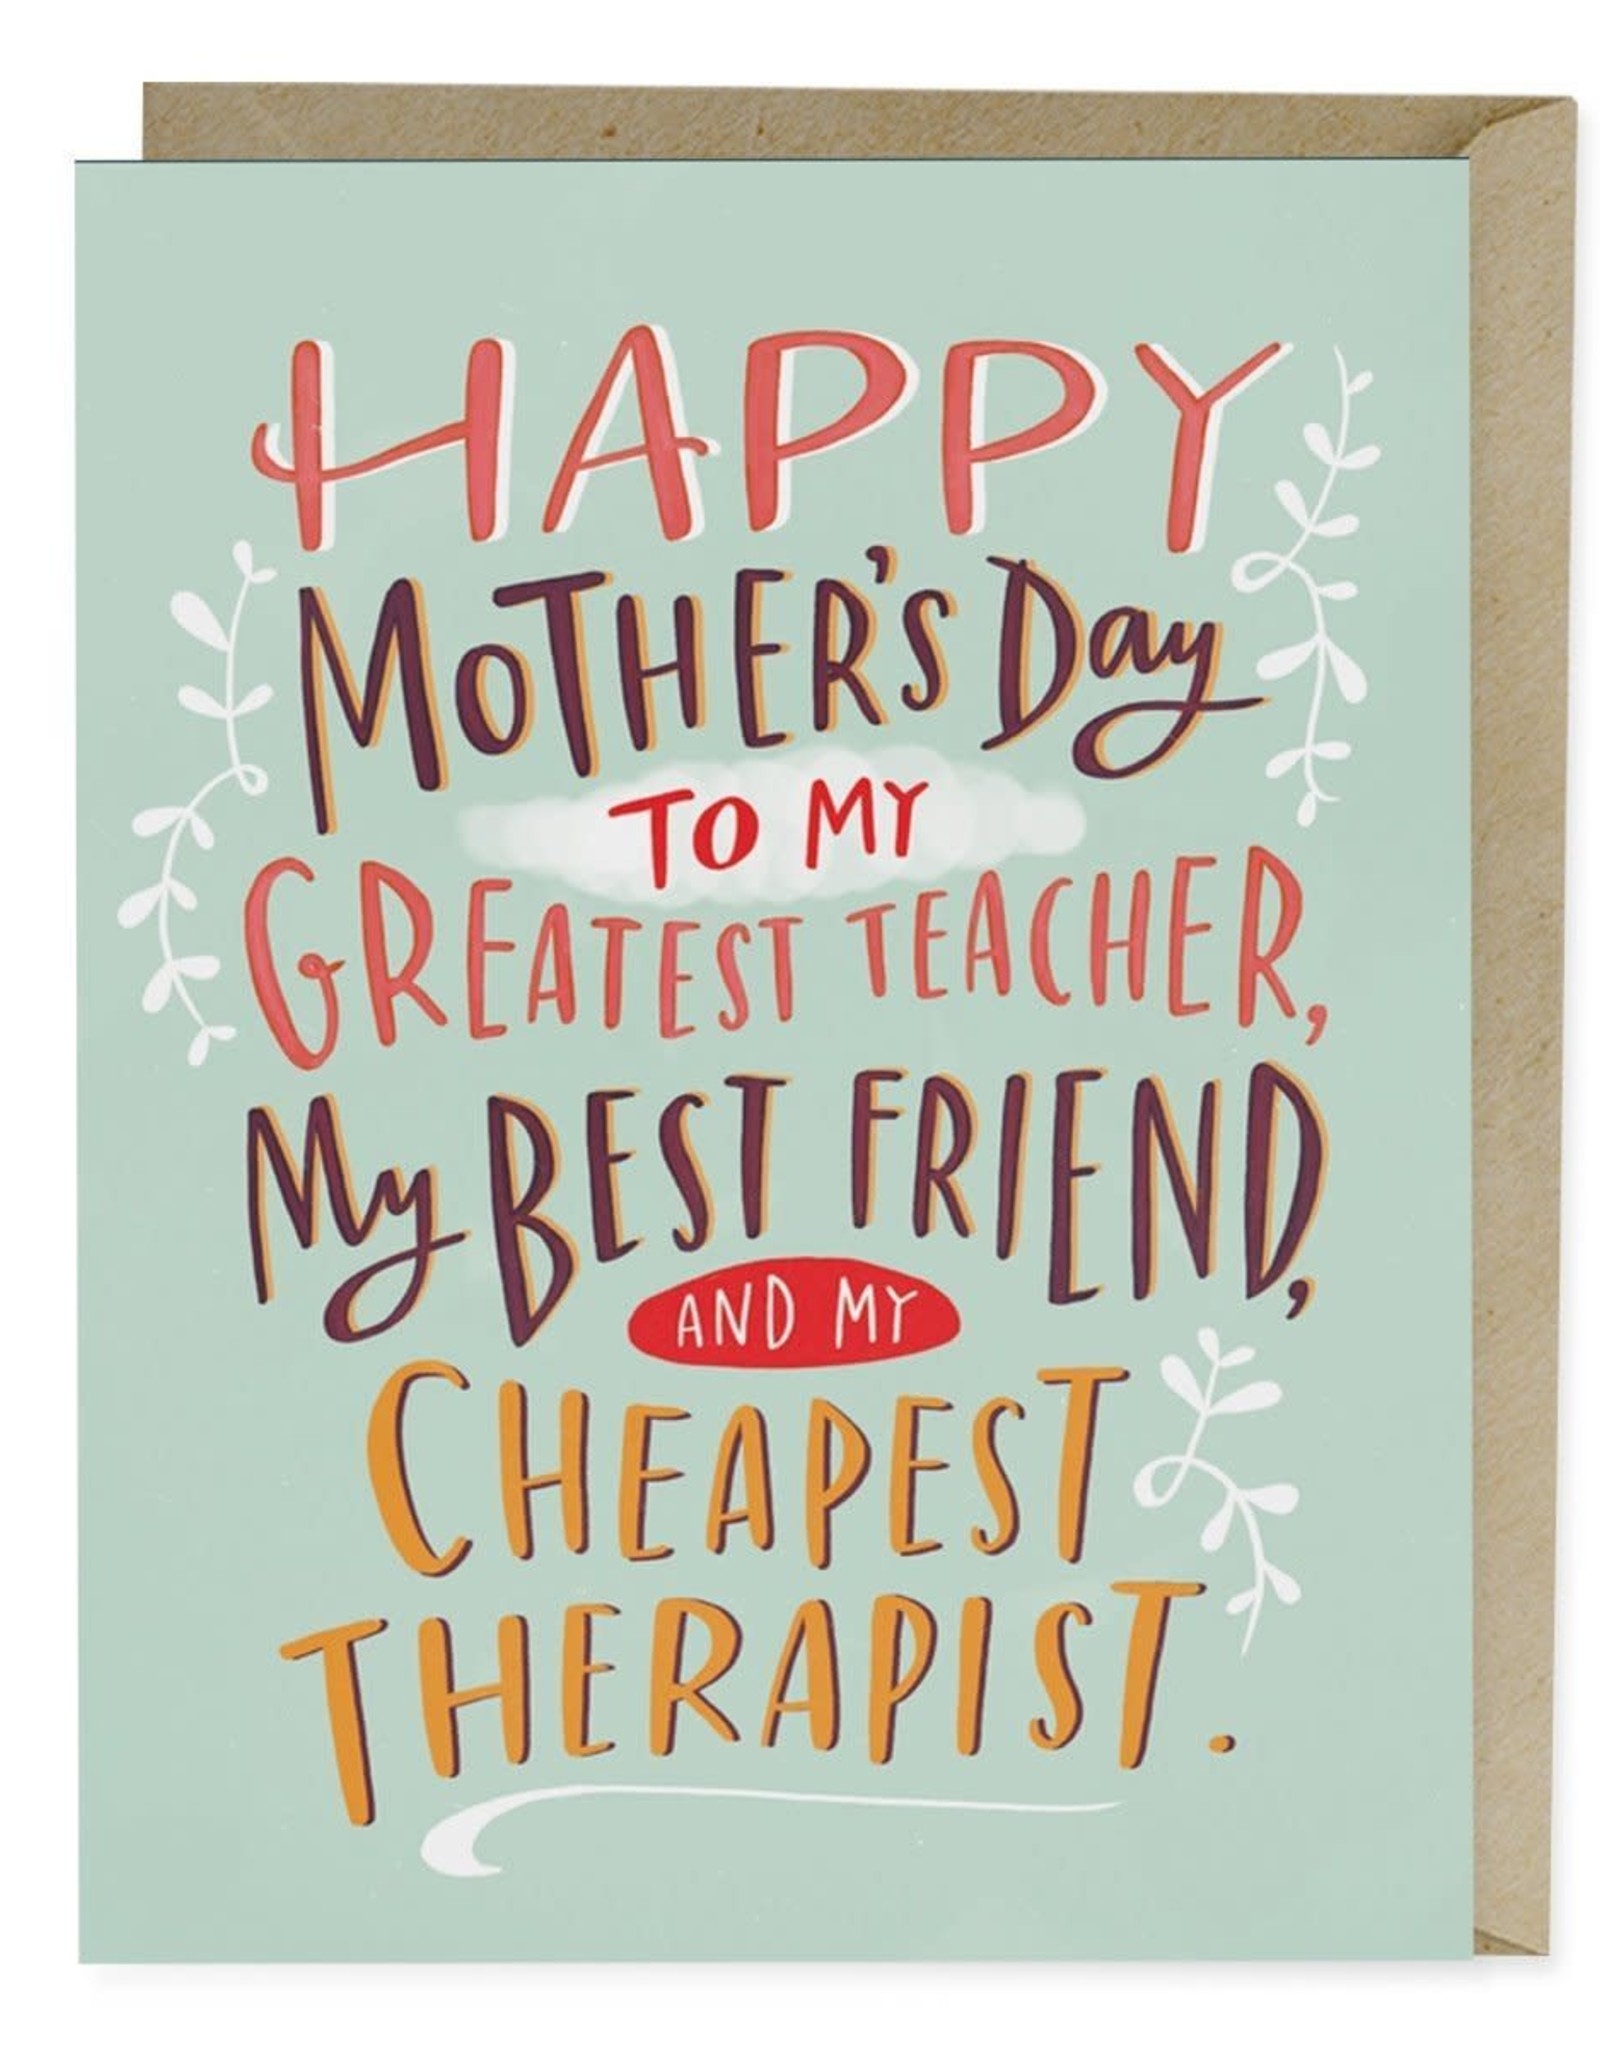 Emily McDowell Cheapest Therapist Mother’s Day Greeting Card - Emily McDowell